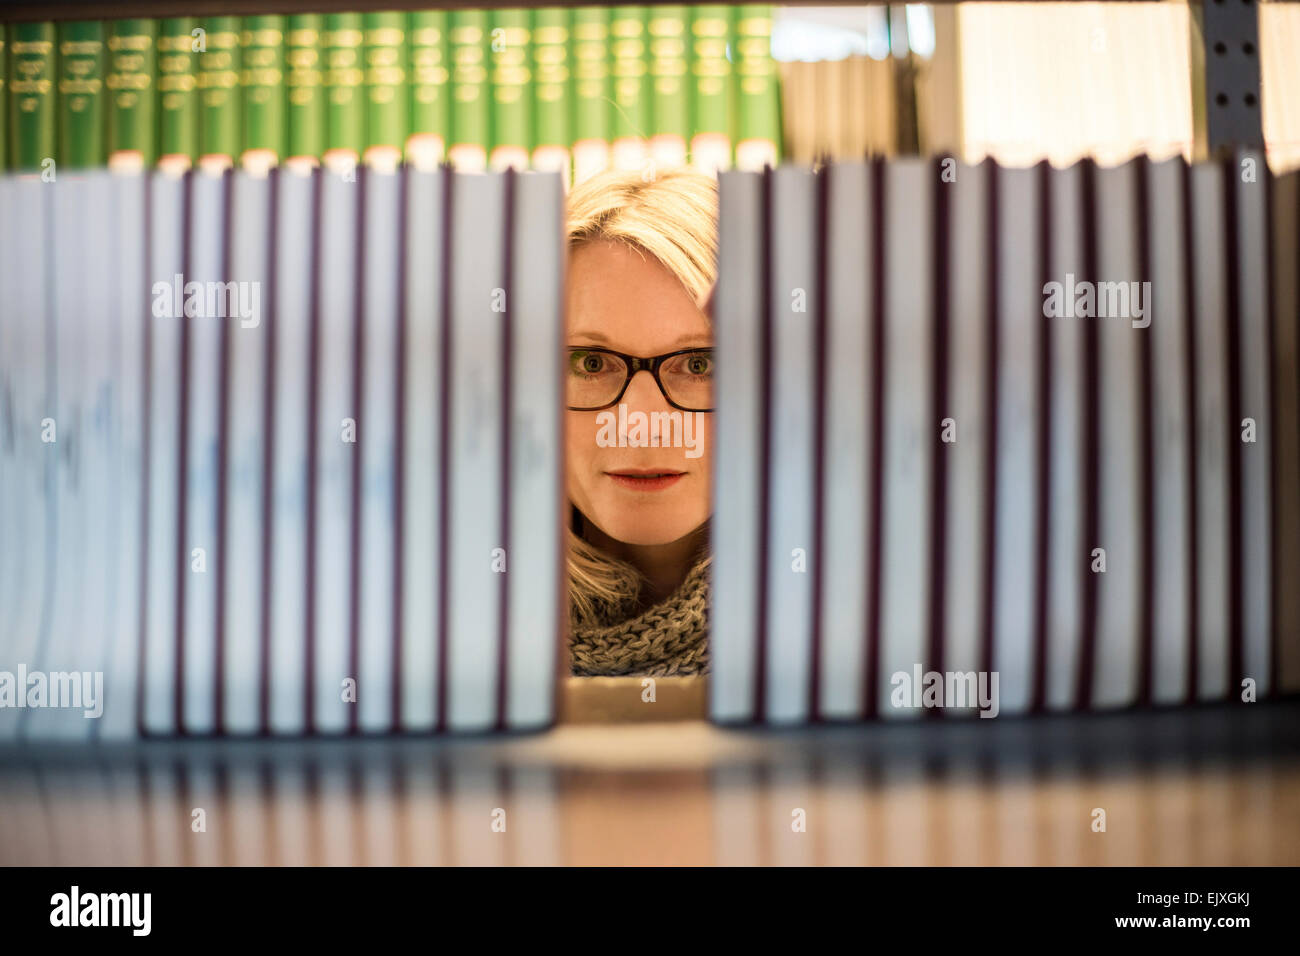 Woman in library looking from behind bookshelf Stock Photo